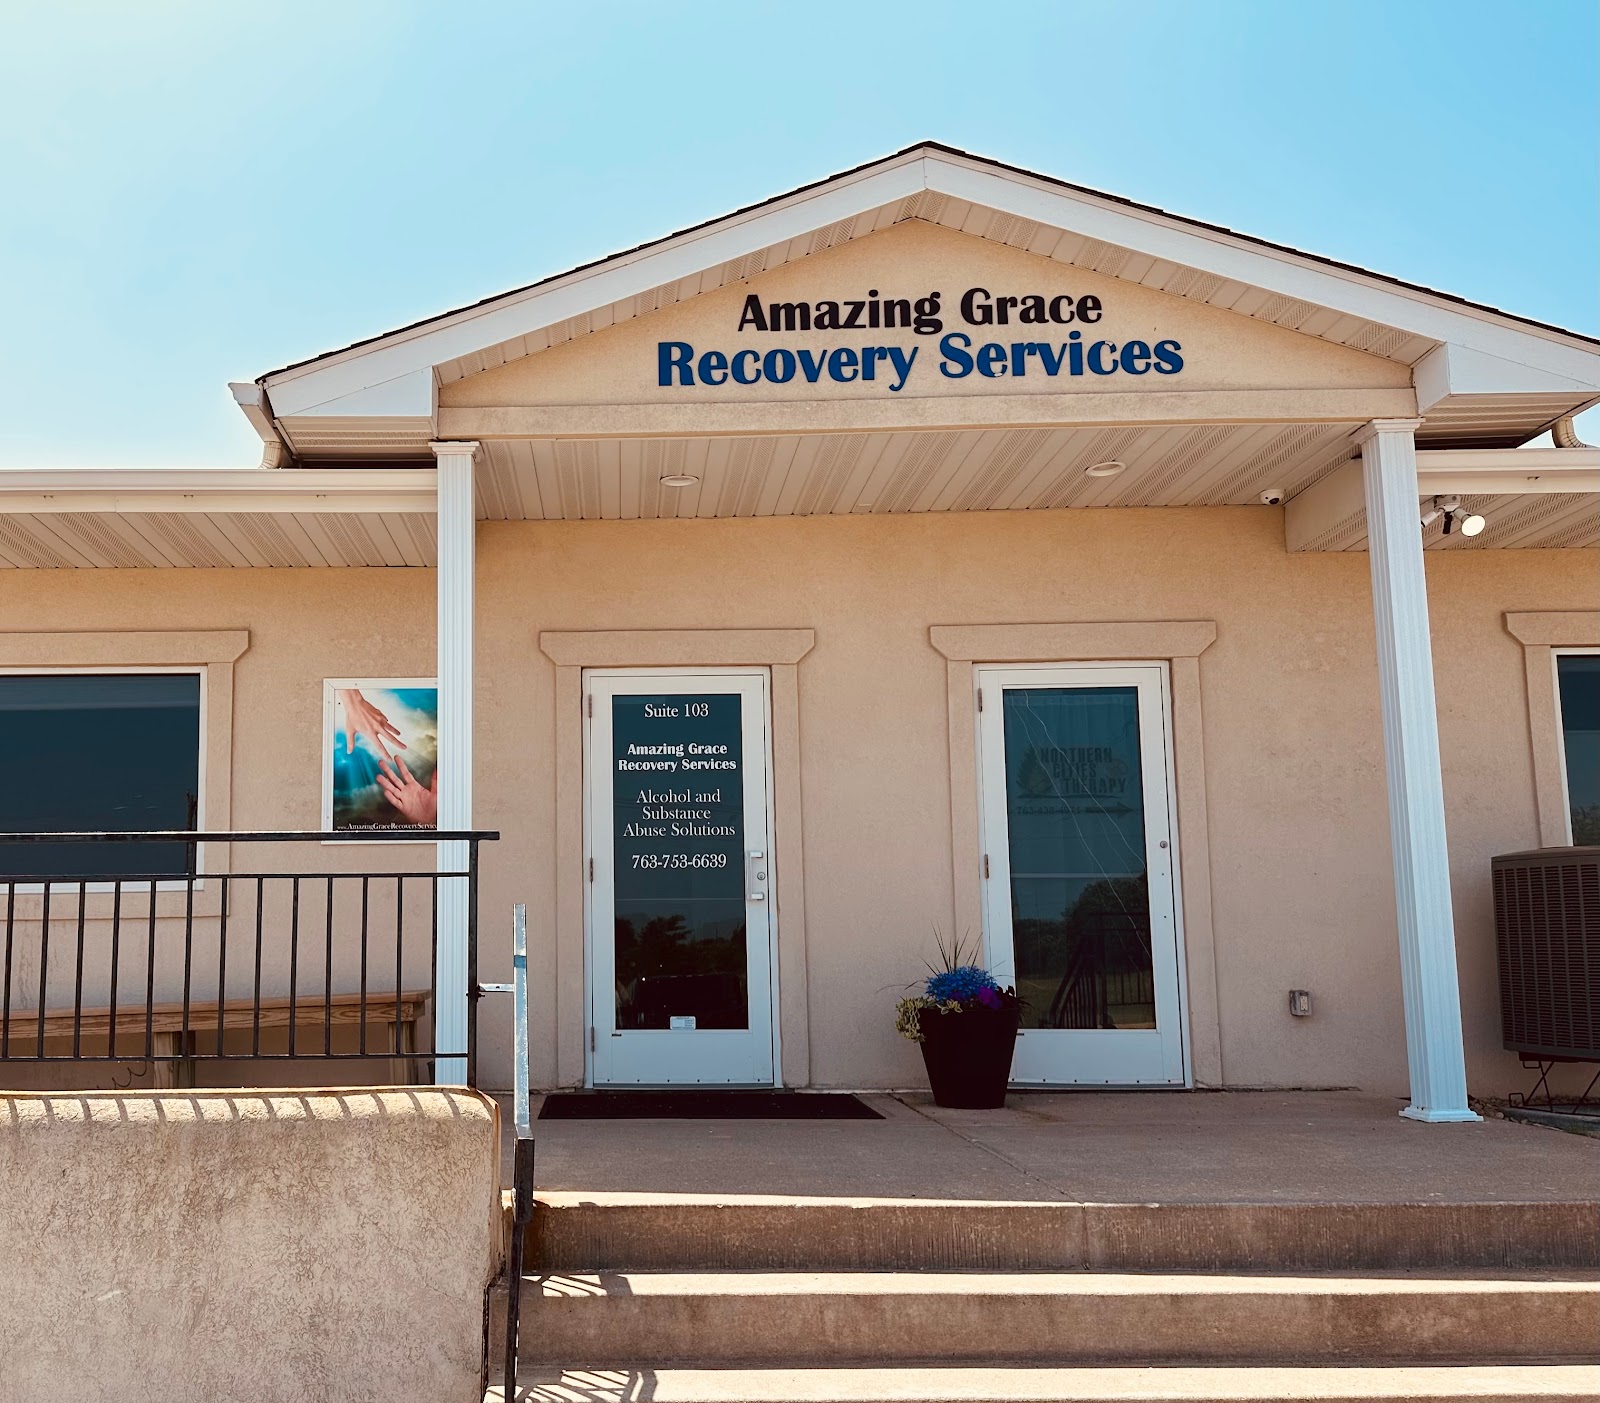 Amazing Grace Recovery Services